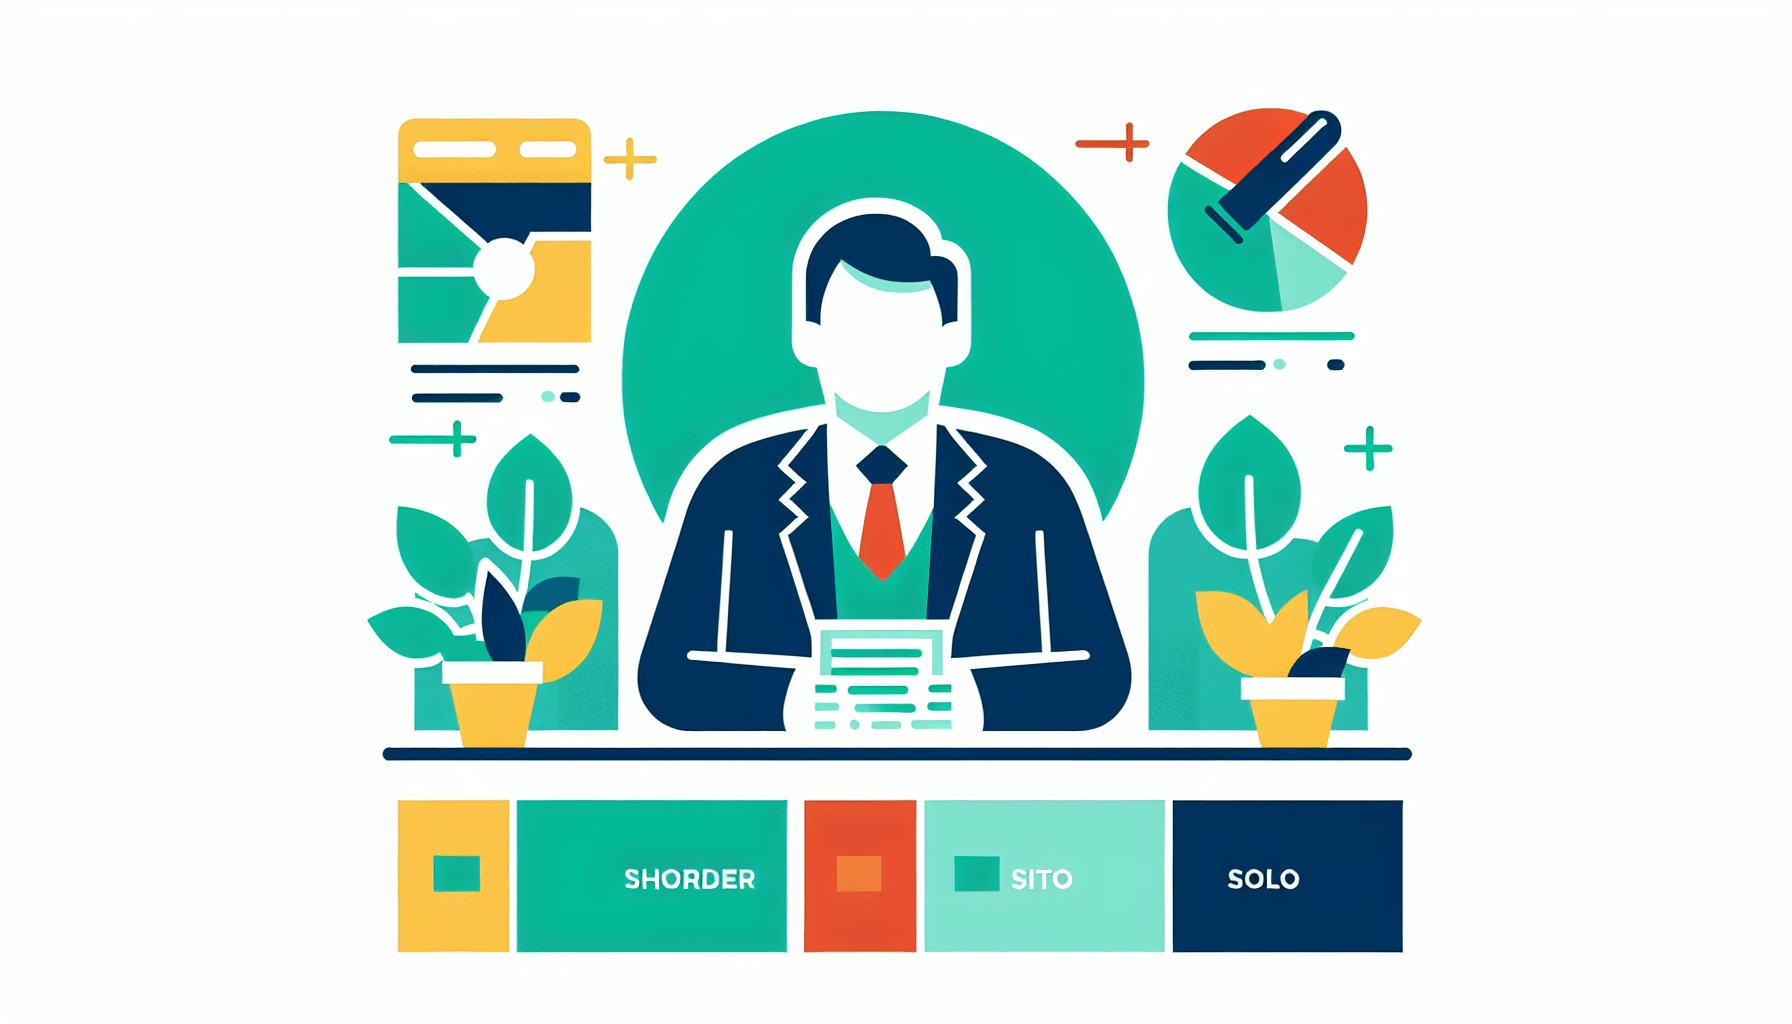 Shareholder in flat illustration style and white background, red #f47574, green #88c7a8, yellow #fcc44b, and blue #645bc8 colors.